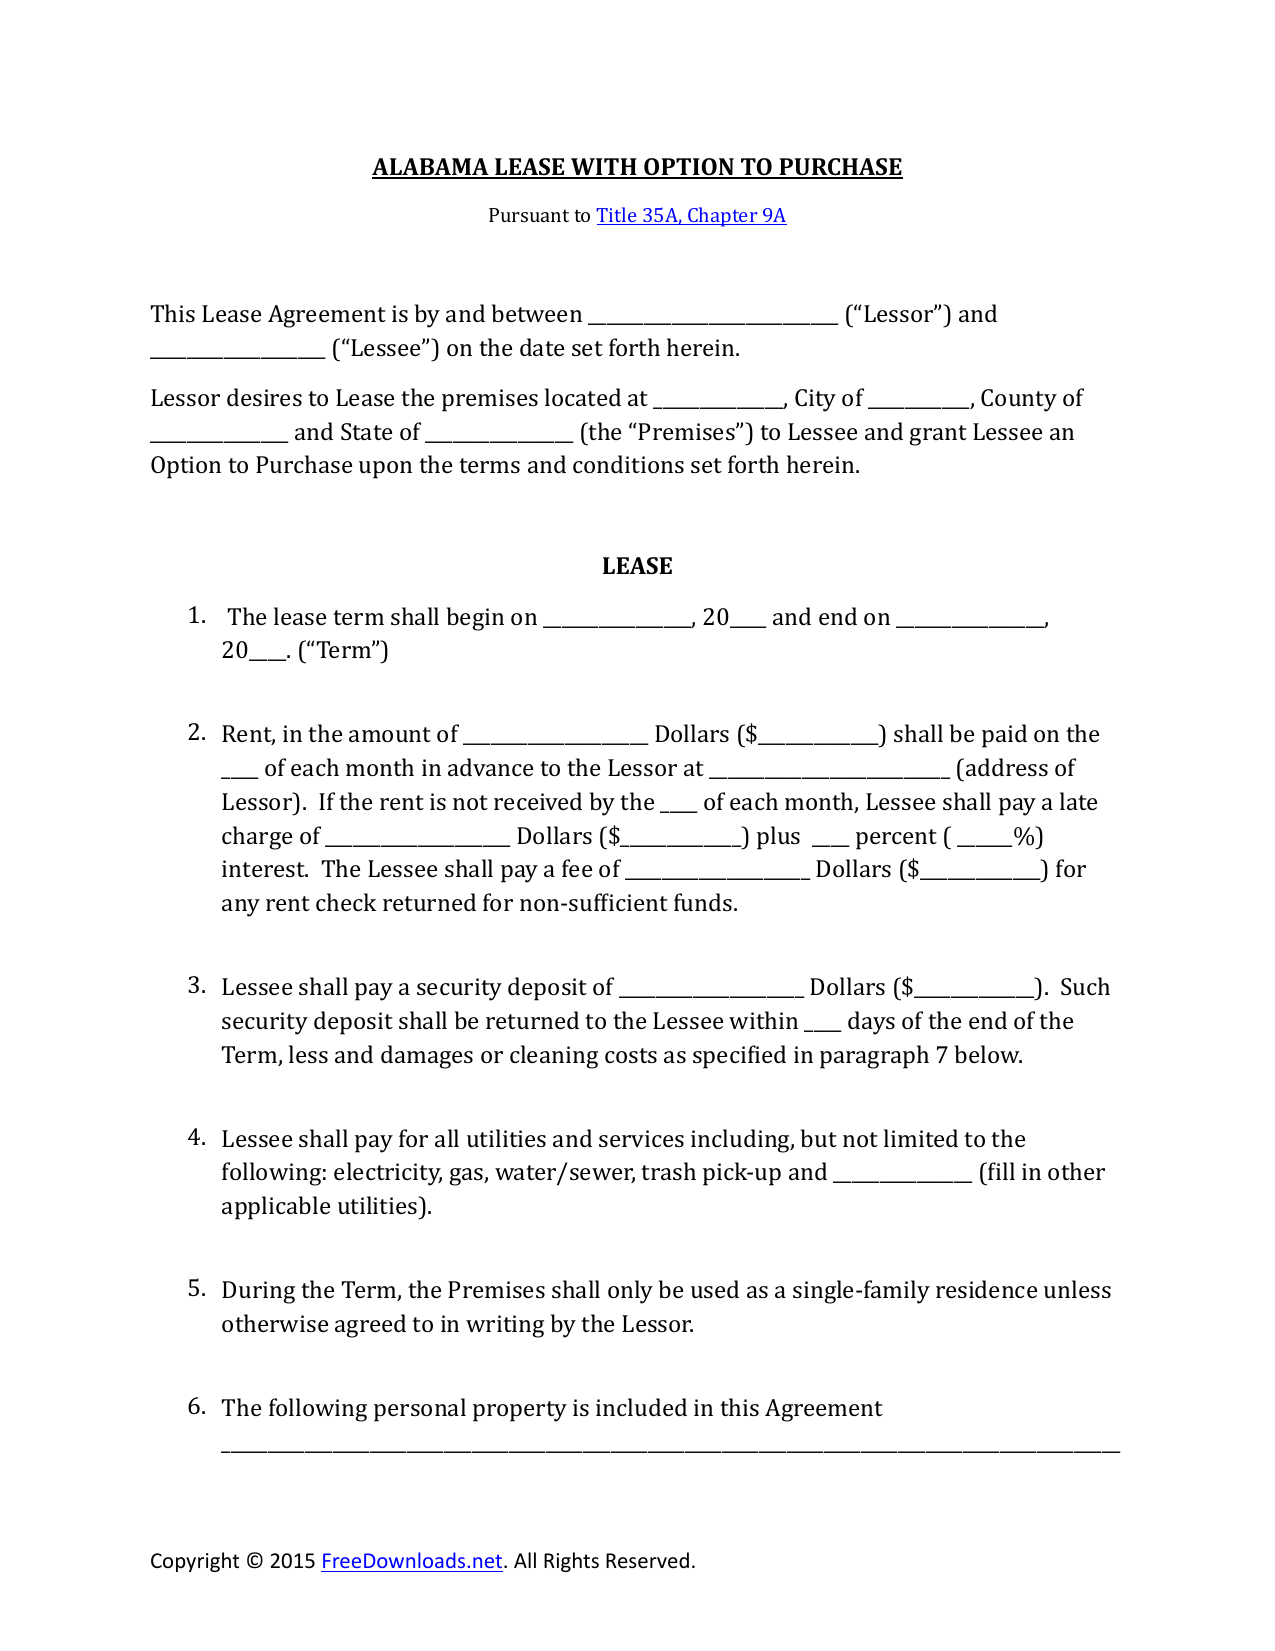 download-alabama-lease-purchase-rent-to-own-agreement-pdf-rtf-word-freedownloads